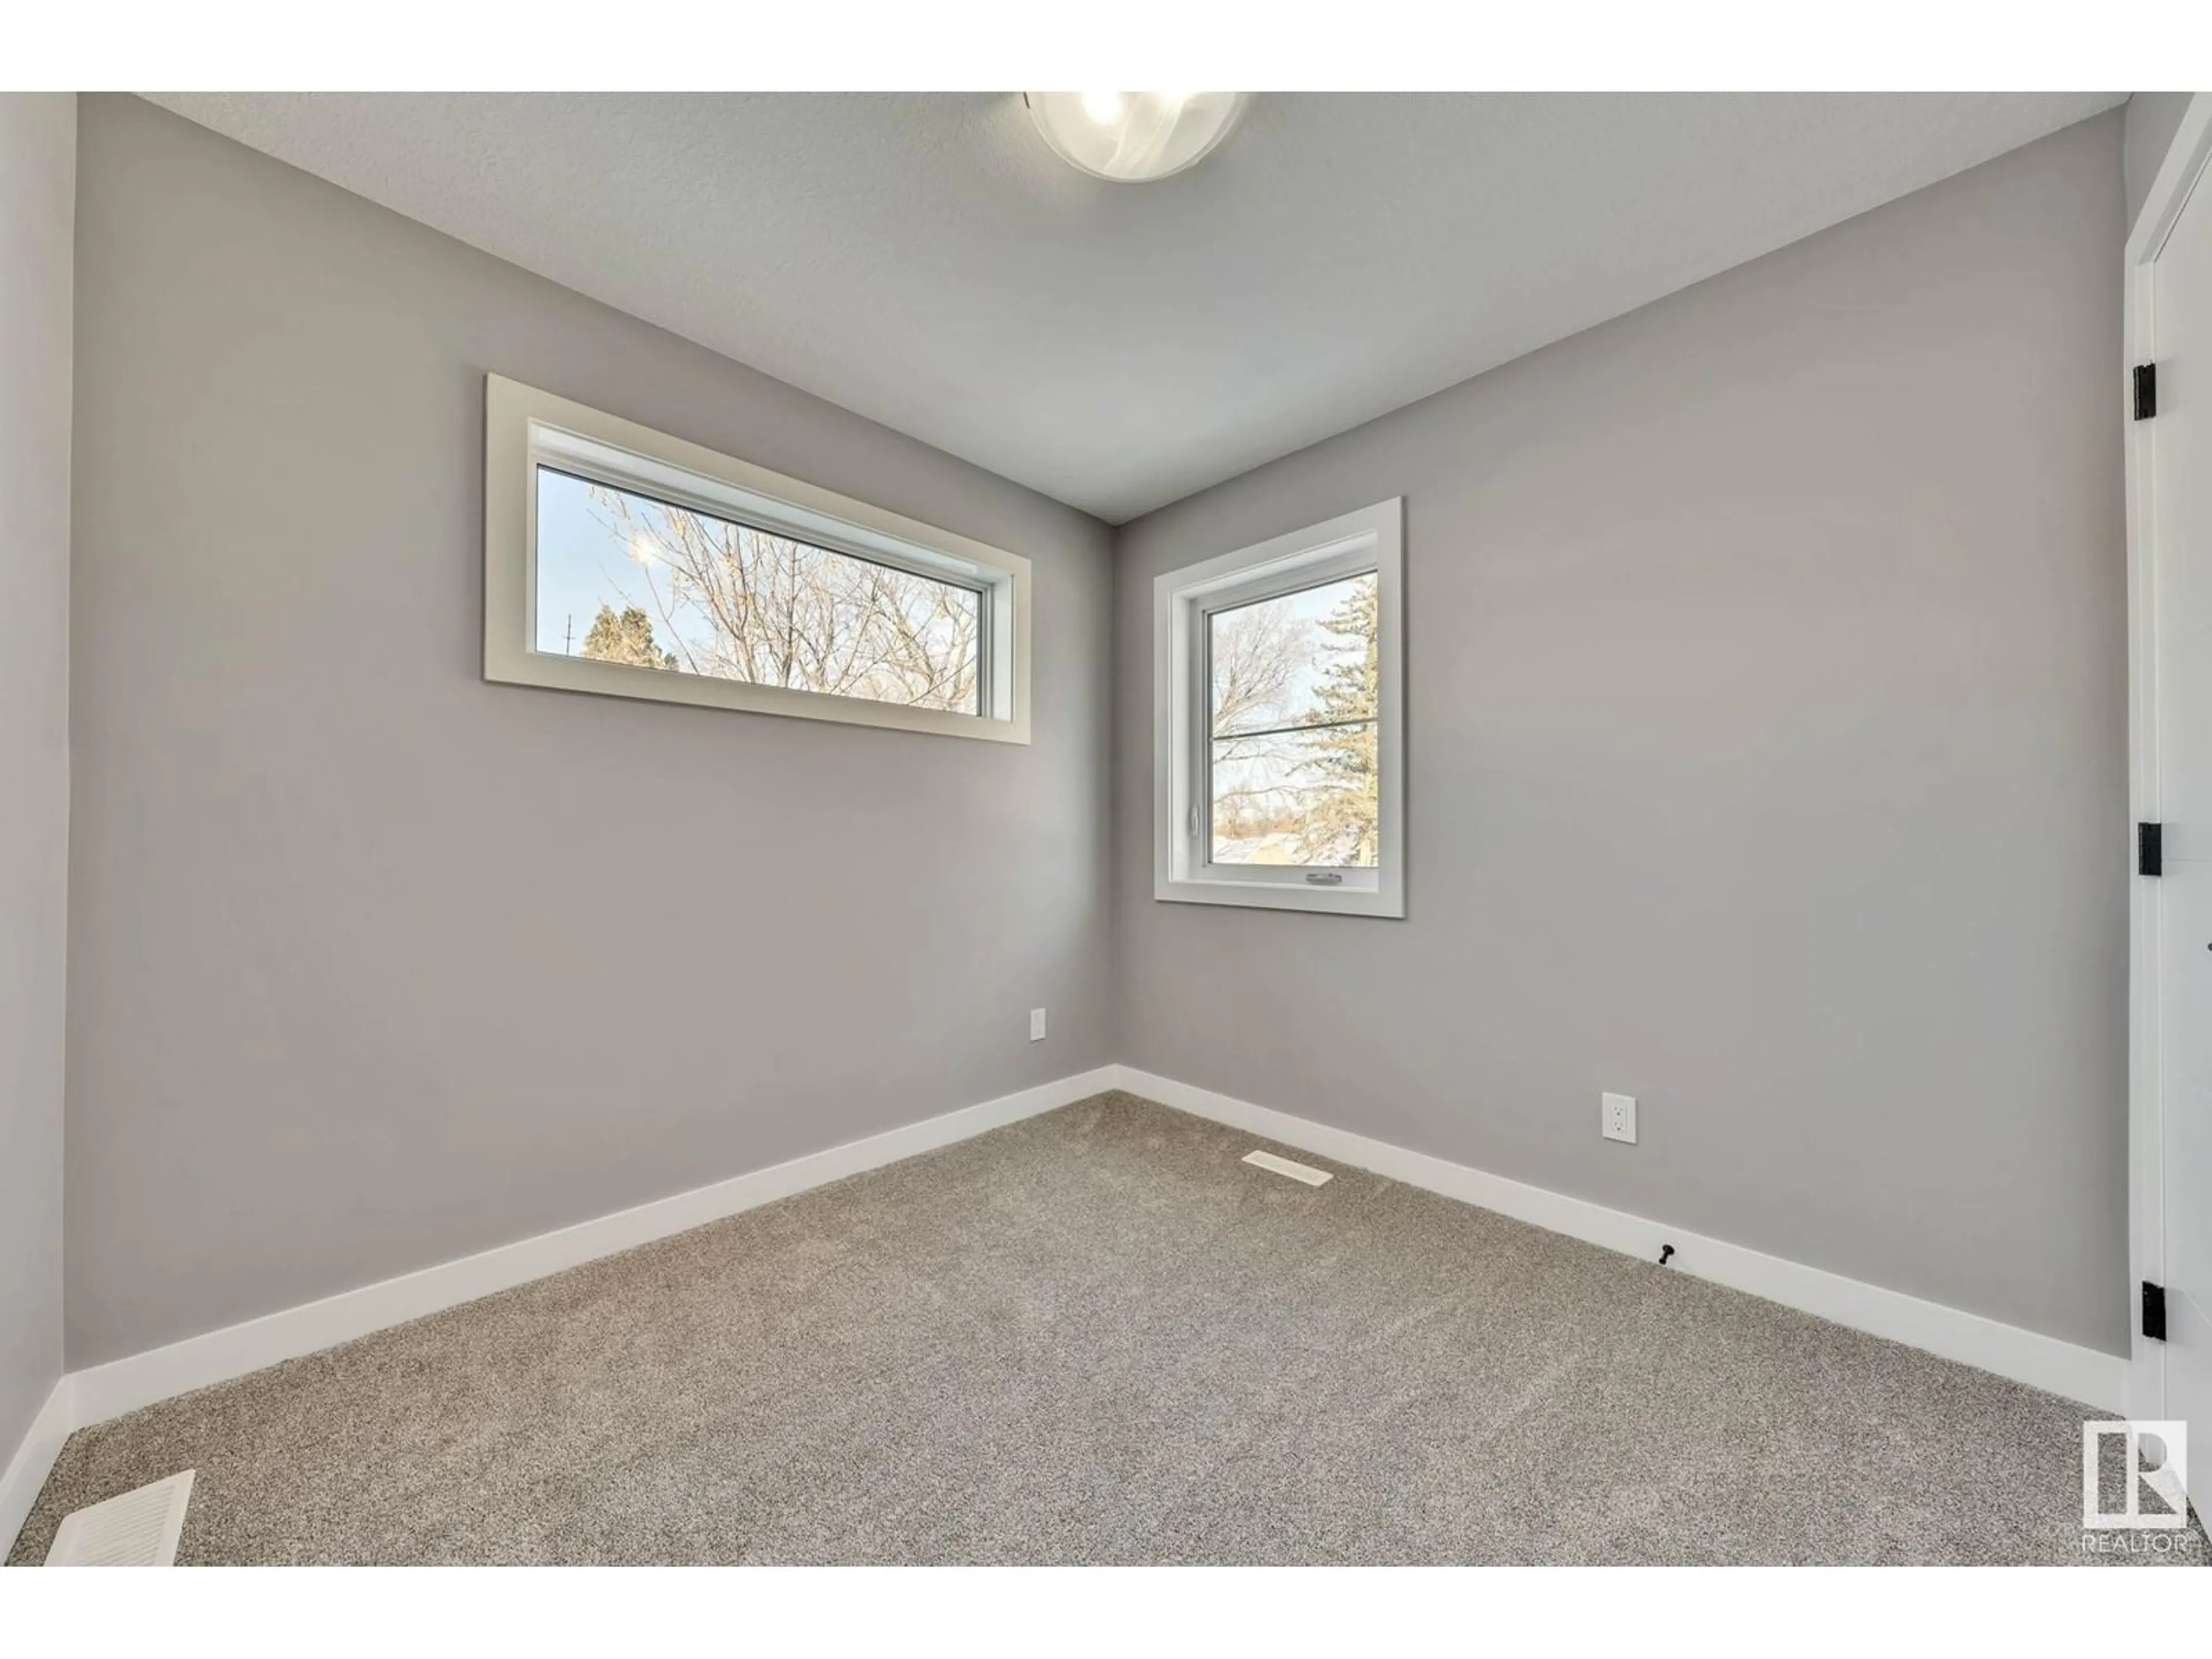 A pic of a room for 11124 96 ST NW, Edmonton Alberta T5G1S7